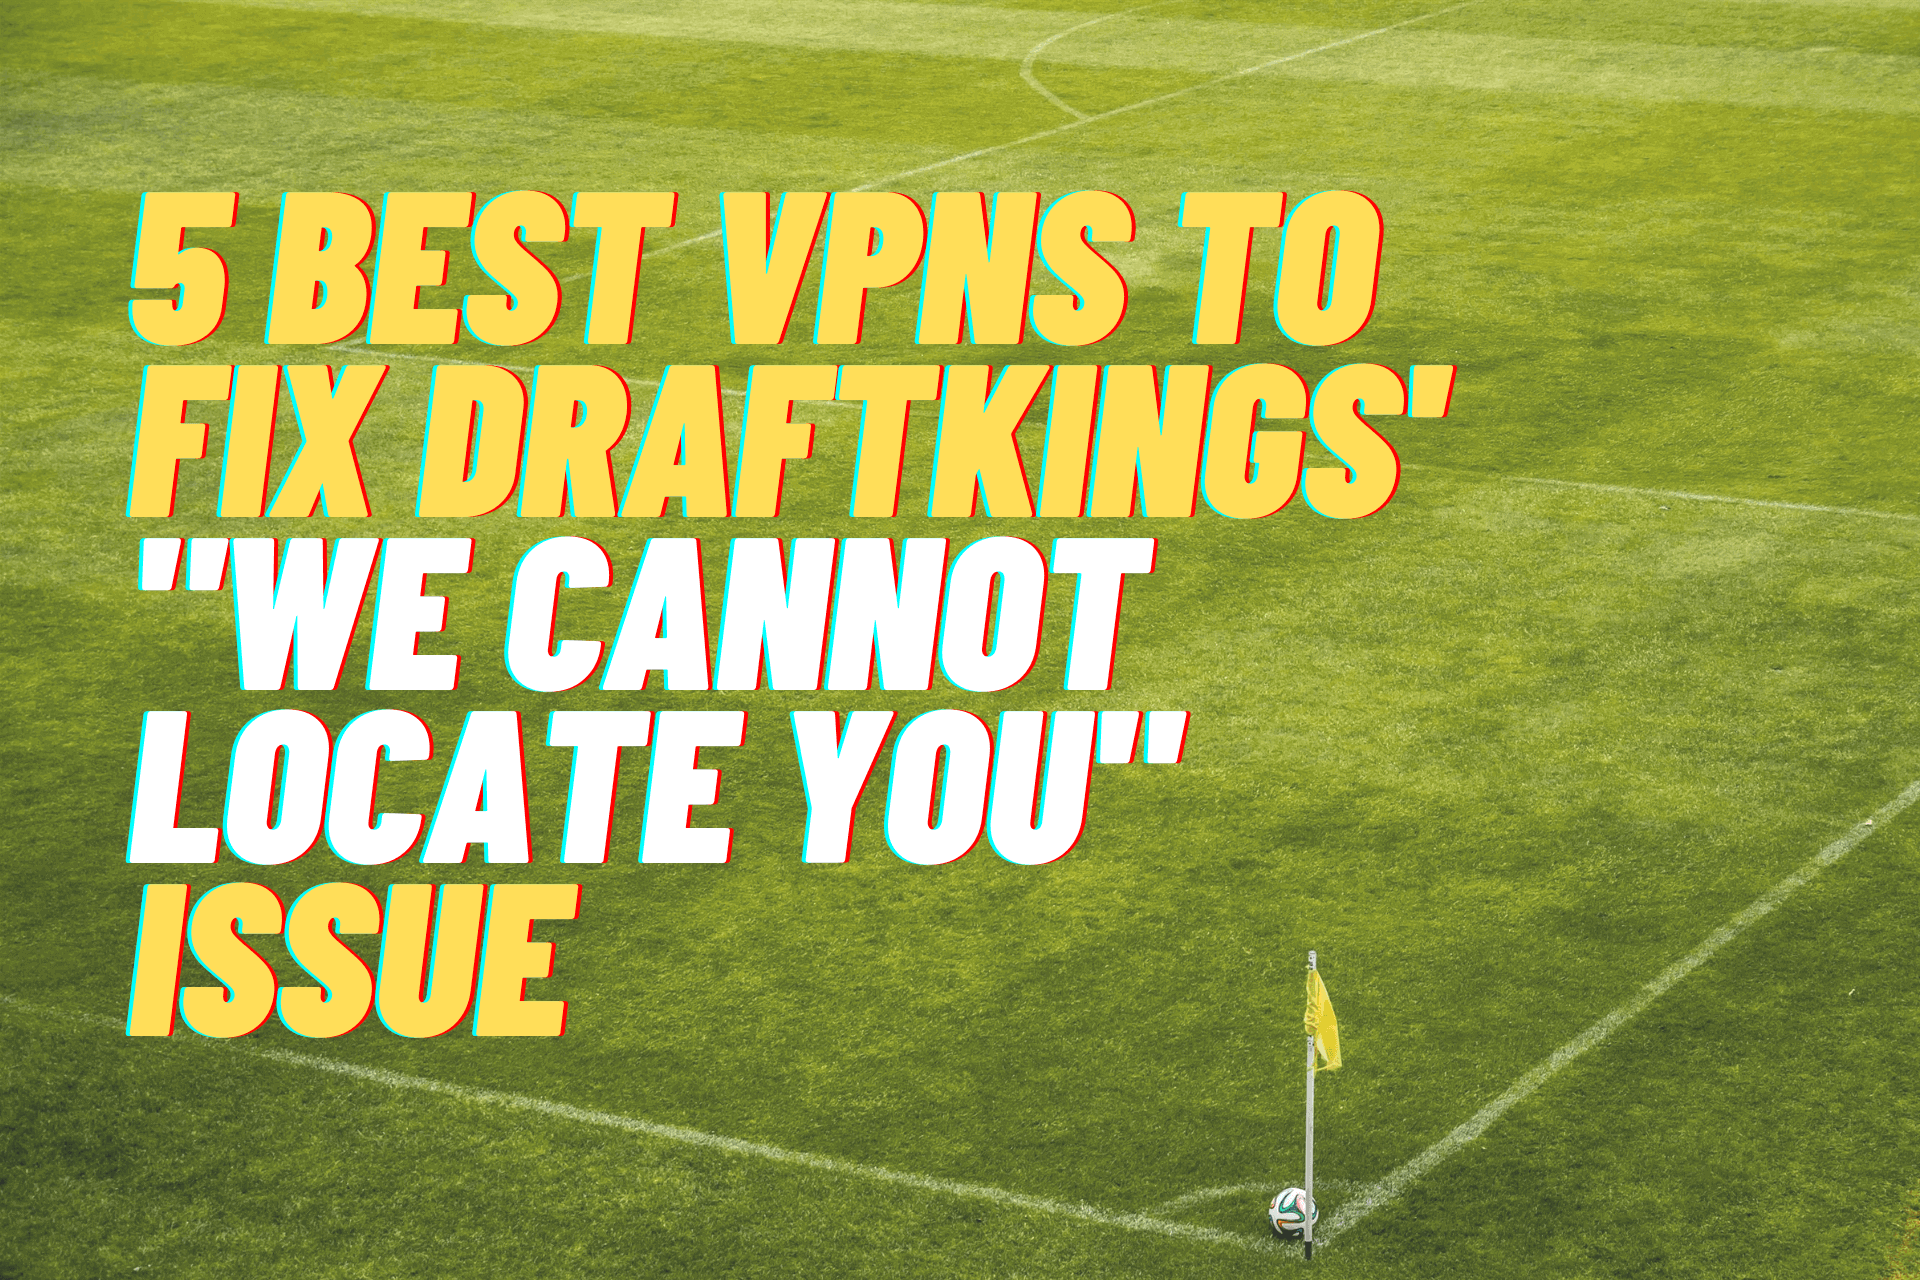 DraftKings "We cannot locate you''